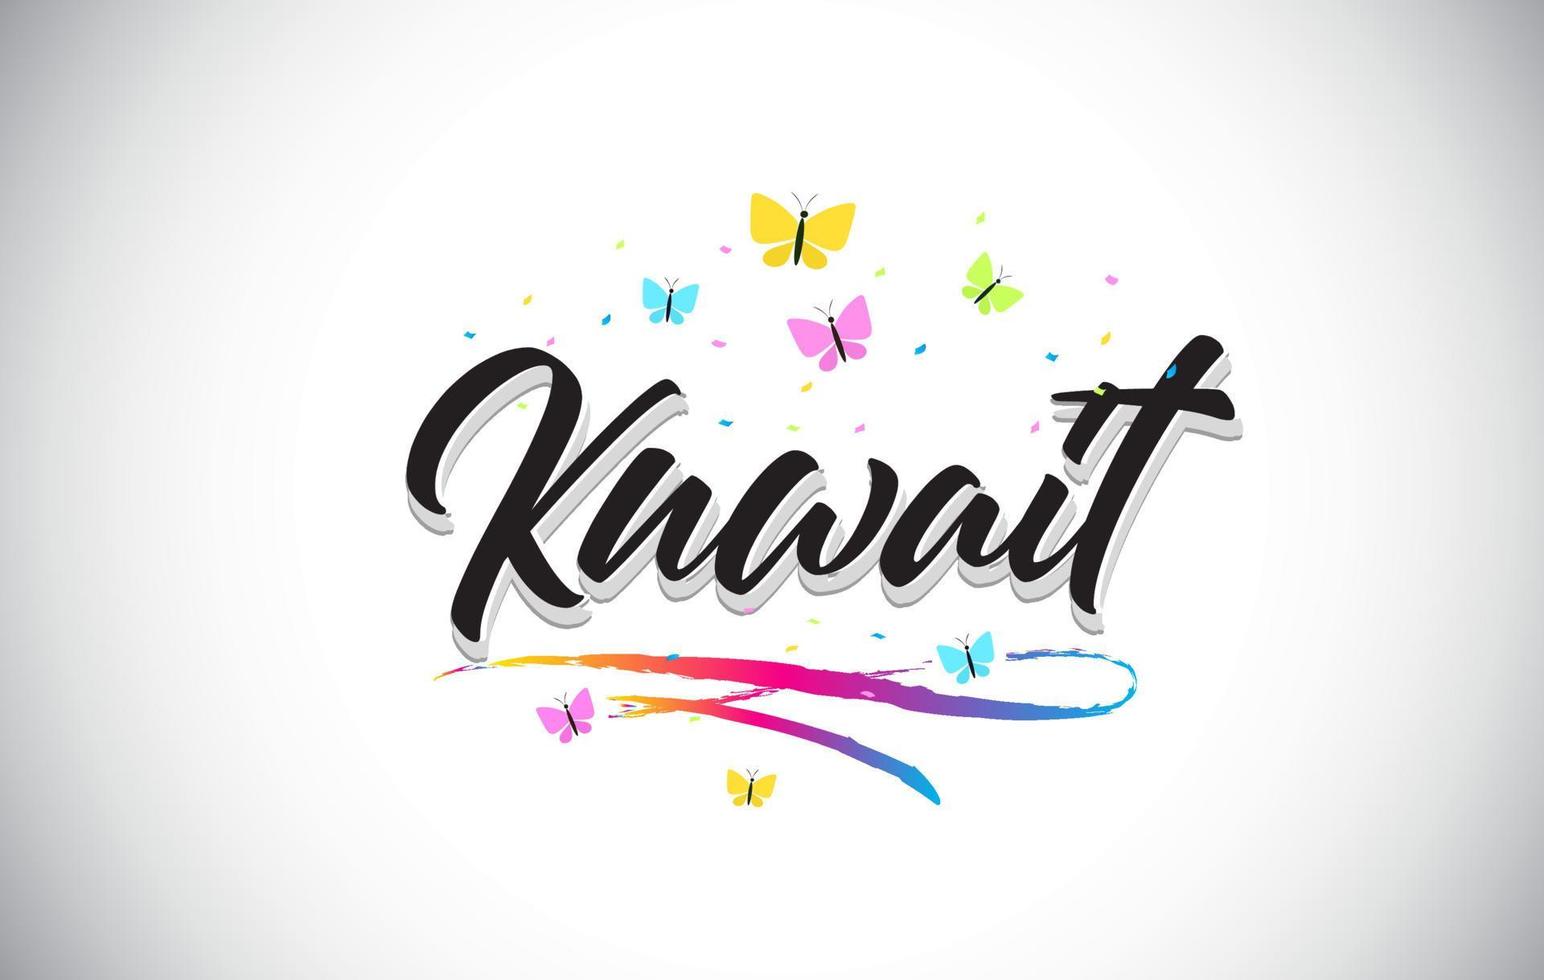 Kuwait Handwritten Vector Word Text with Butterflies and Colorful Swoosh.